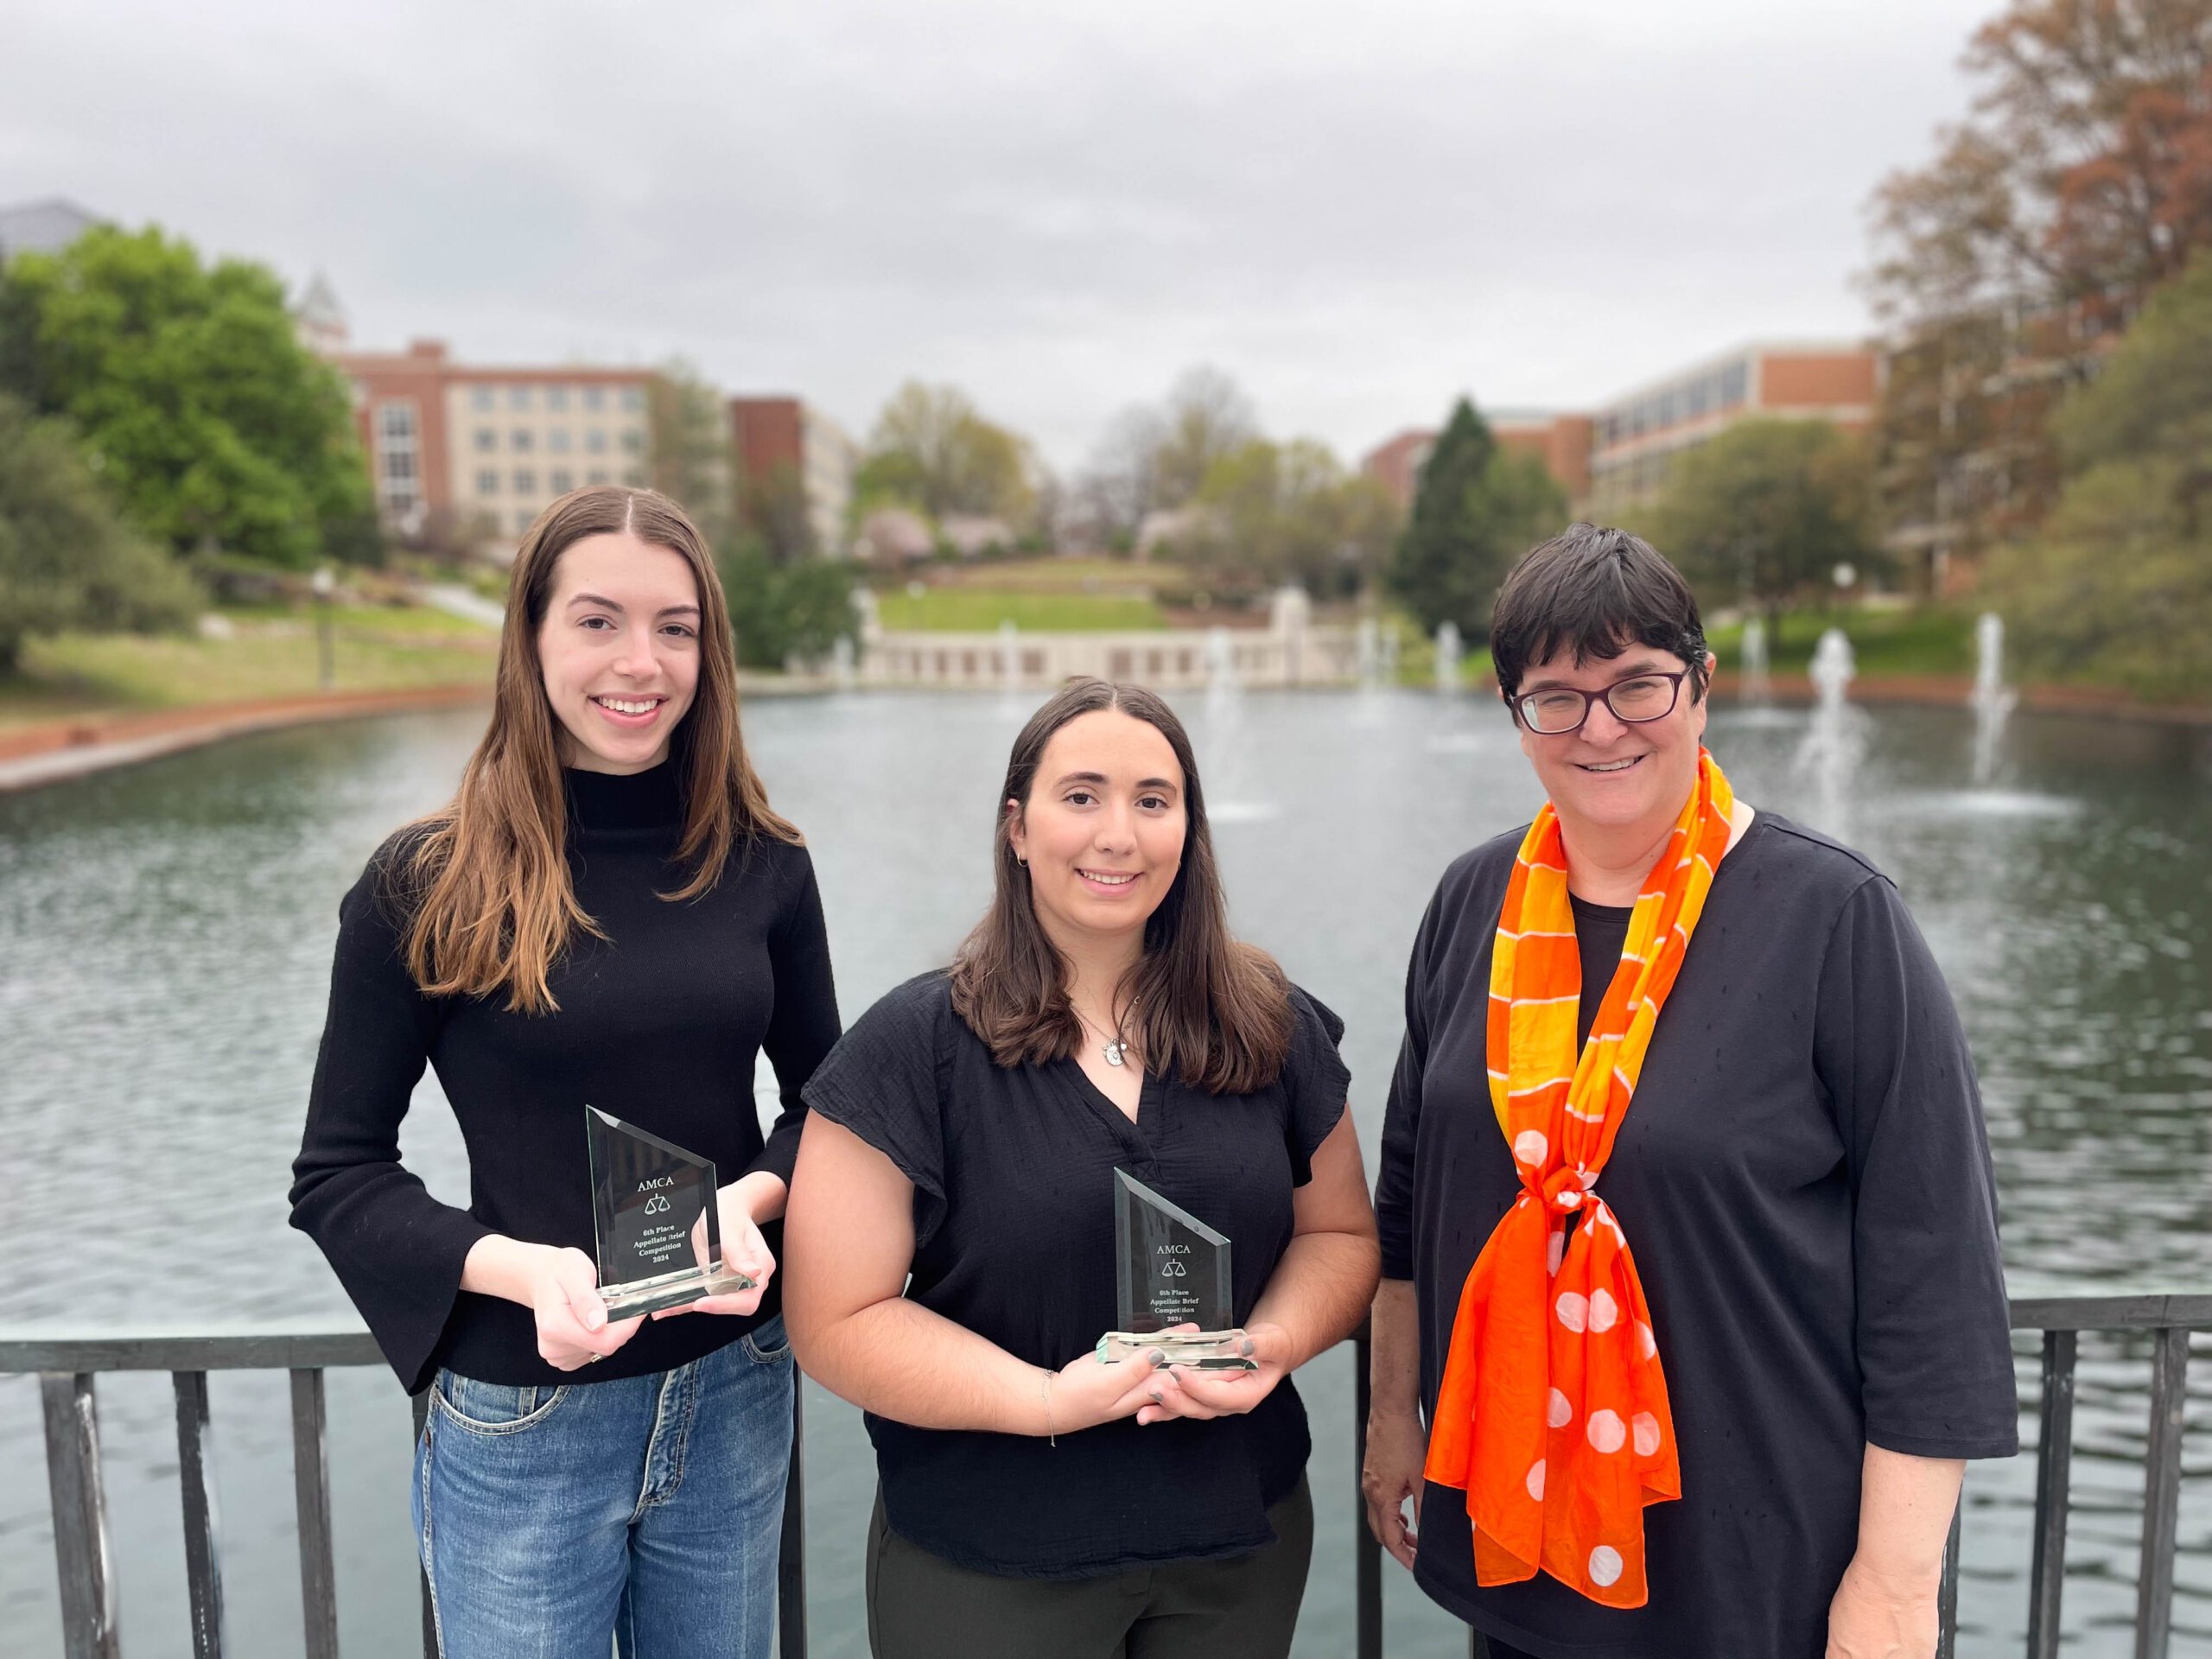 Caroline Morgan (left), Teresa Ribeiro (middle) and Cary Berkeley Kaye pose for a picture in front of the reflection pond on Clemson University's main campus. The weather is gloomy.